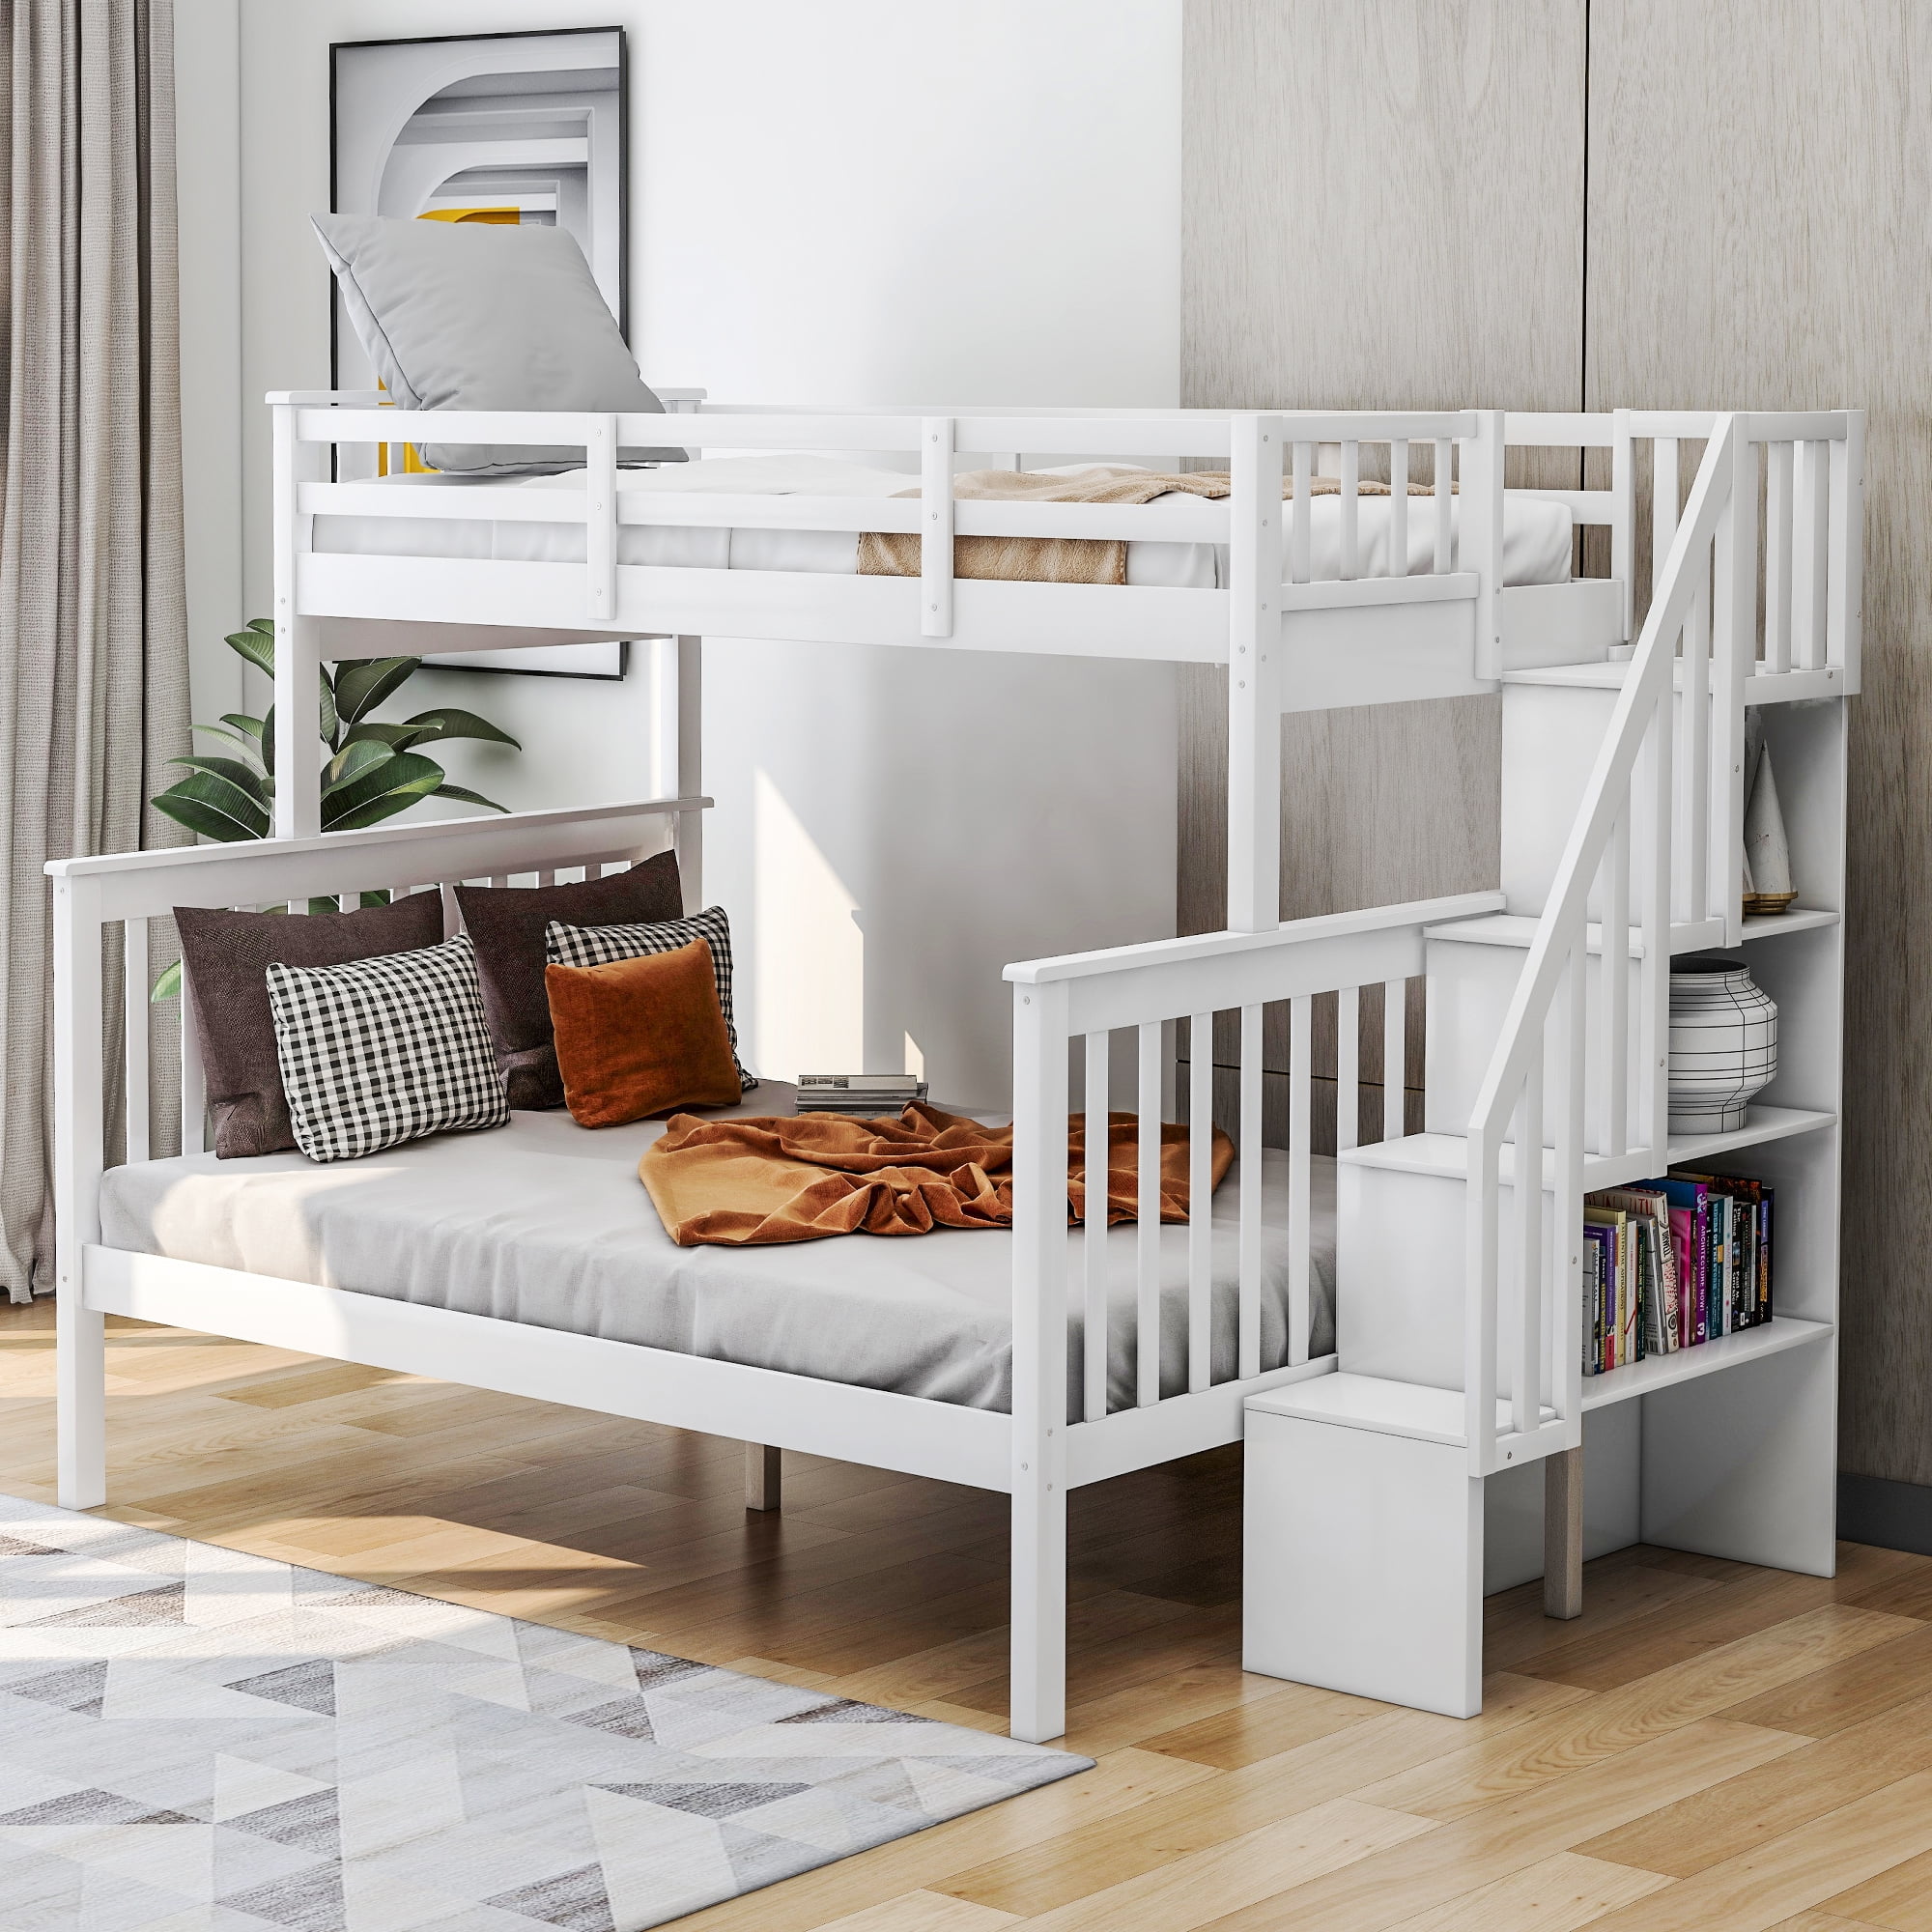 Bunk Beds Twin Over Full Size Heavy, White Bunk Beds With Pull Out Bed